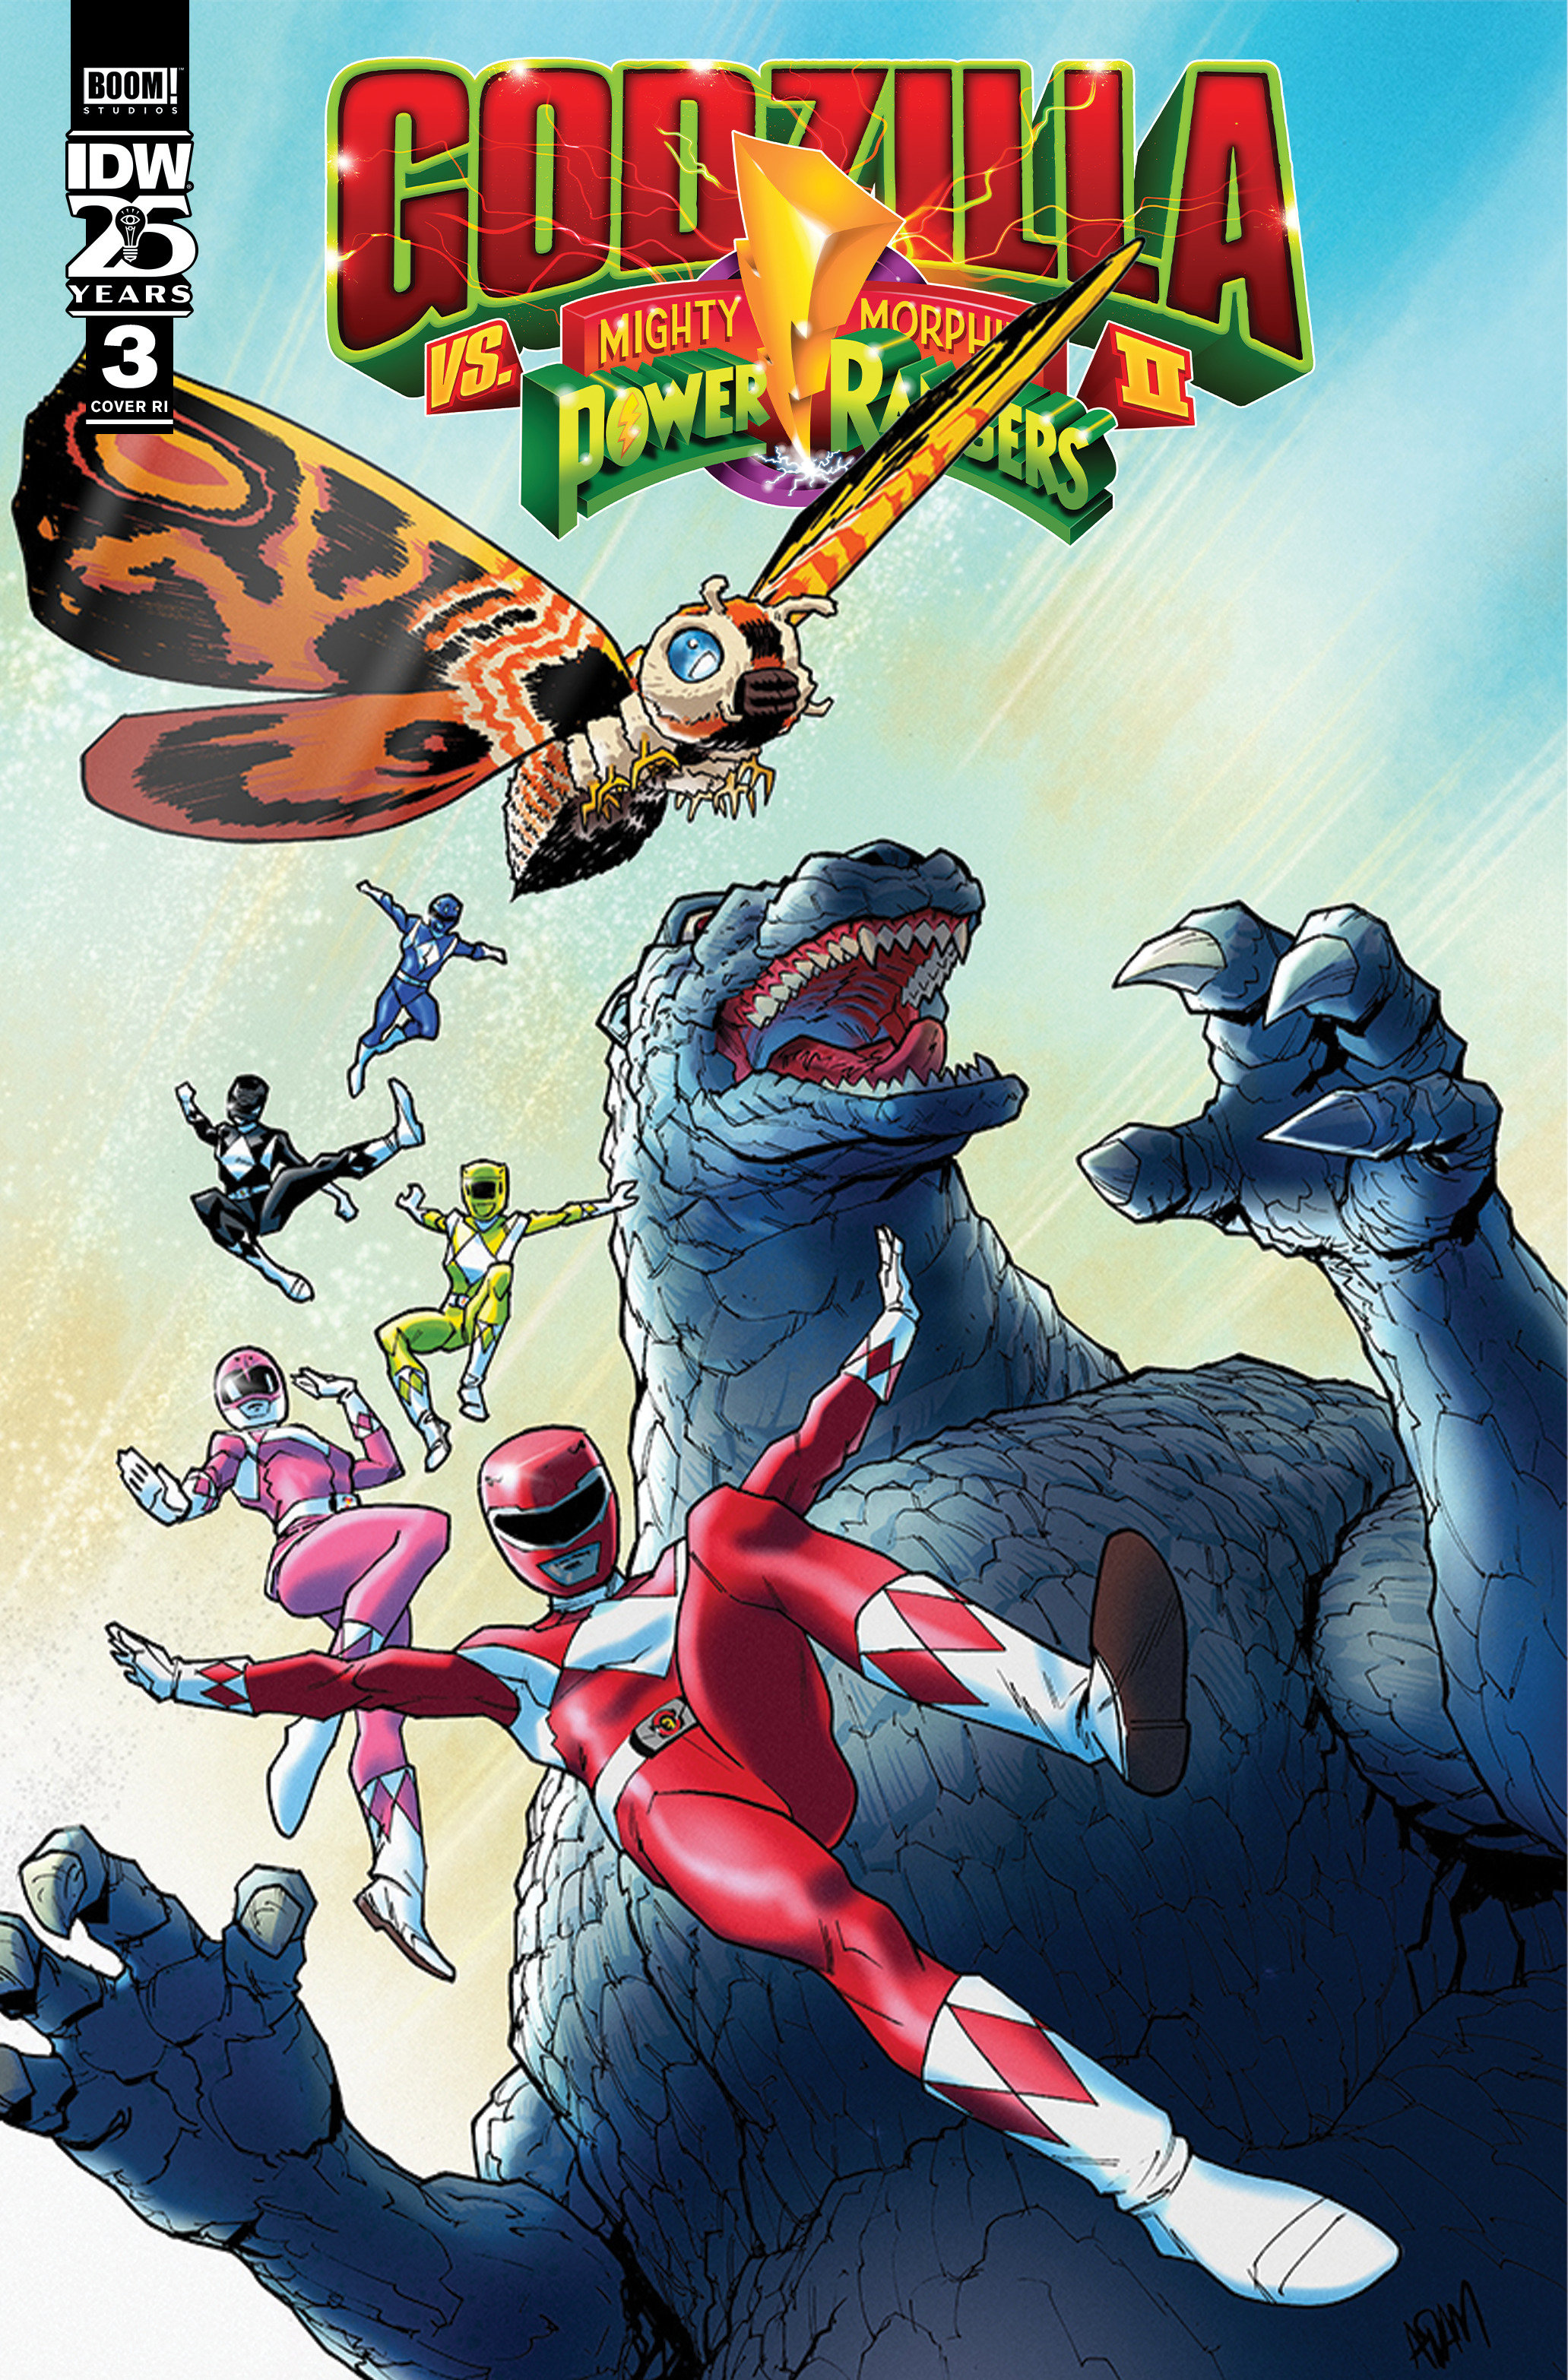 Godzilla Vs. The Mighty Morphin Power Rangers II #3 Cover Gorham 1 for 10 Incentive Variant